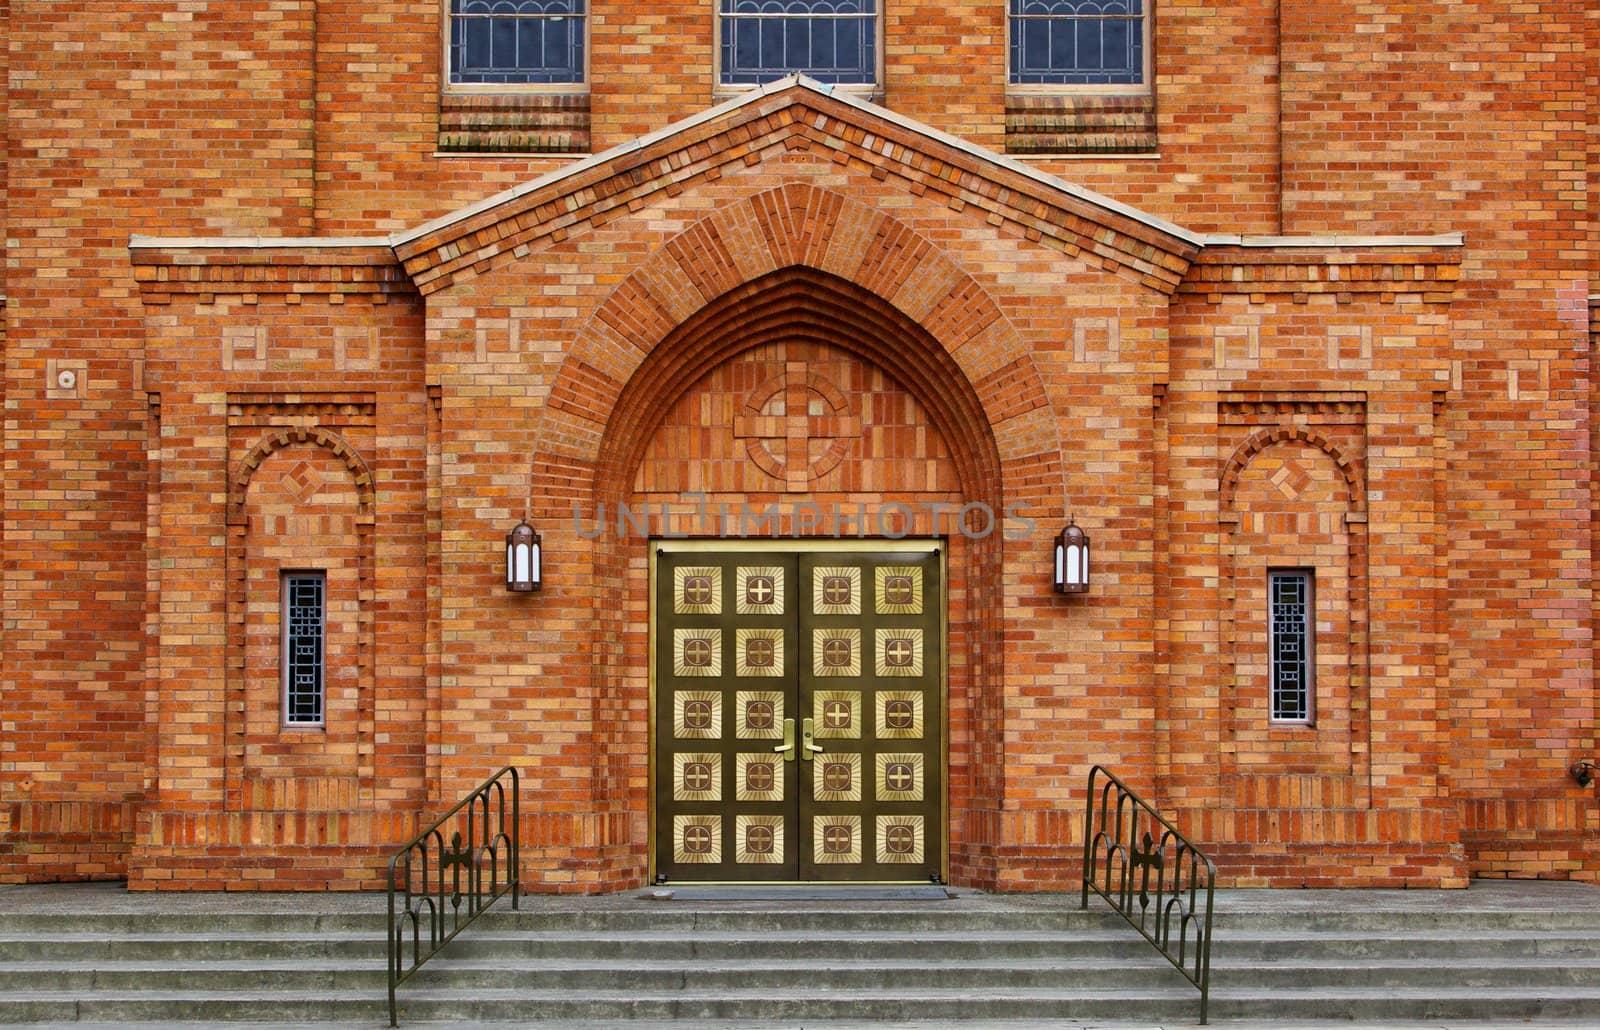 Green brass doors and orange brick facade of the front of a Greek Orthodox Church